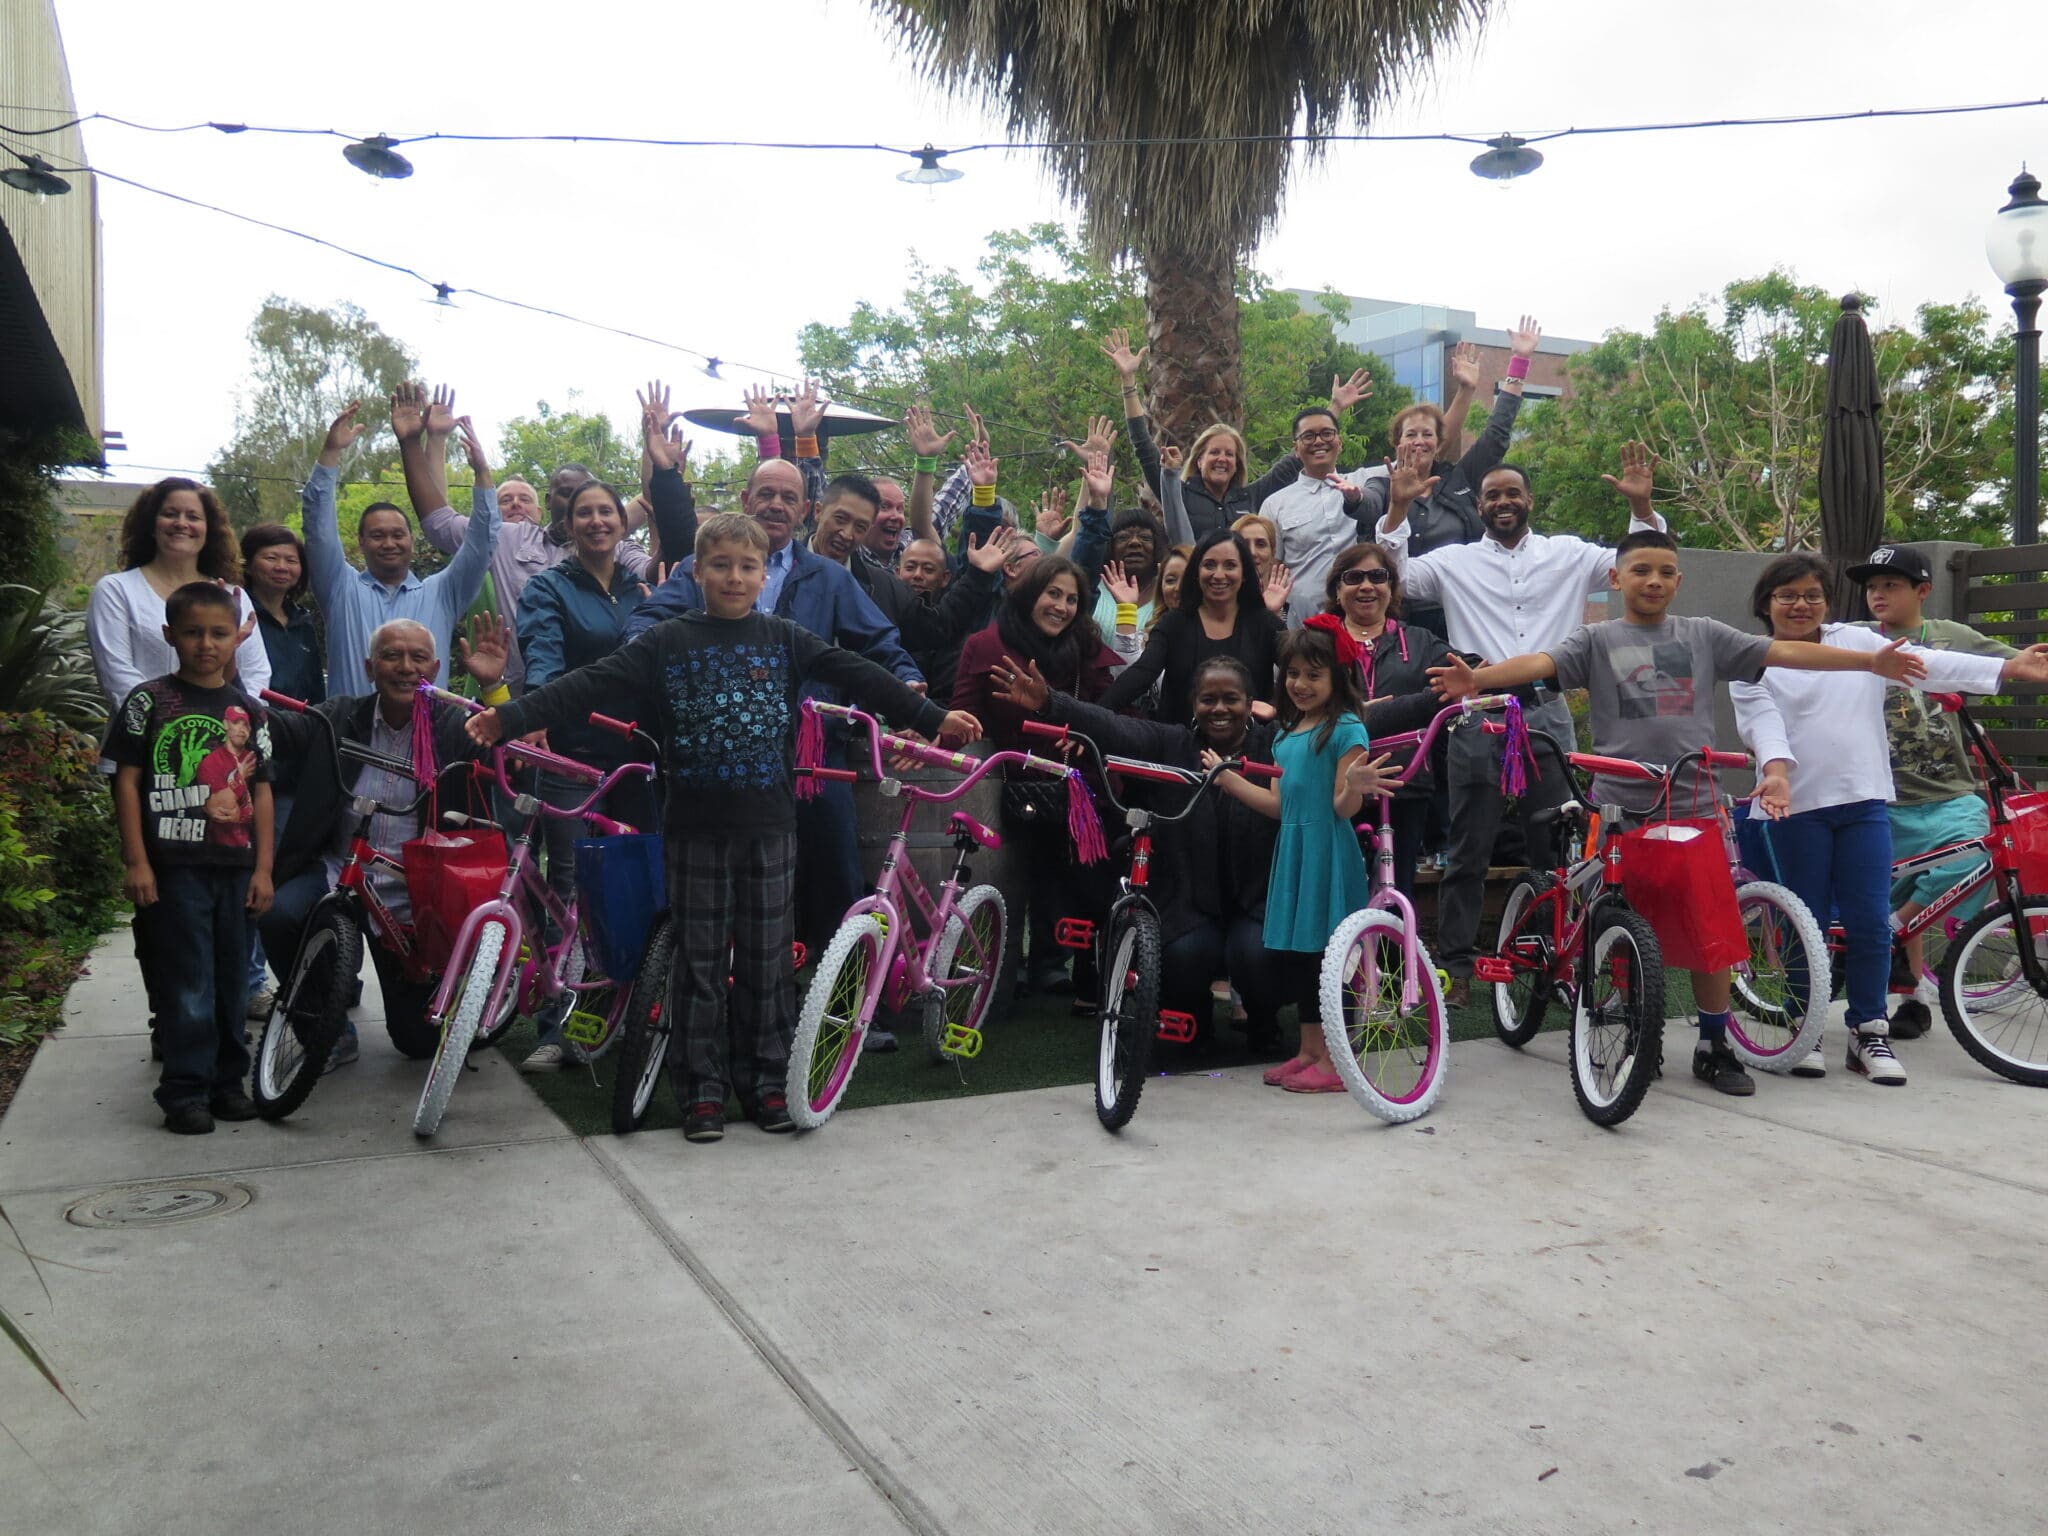 Fenwick and West Build-A-Bike Team Event in San Francisco, CA